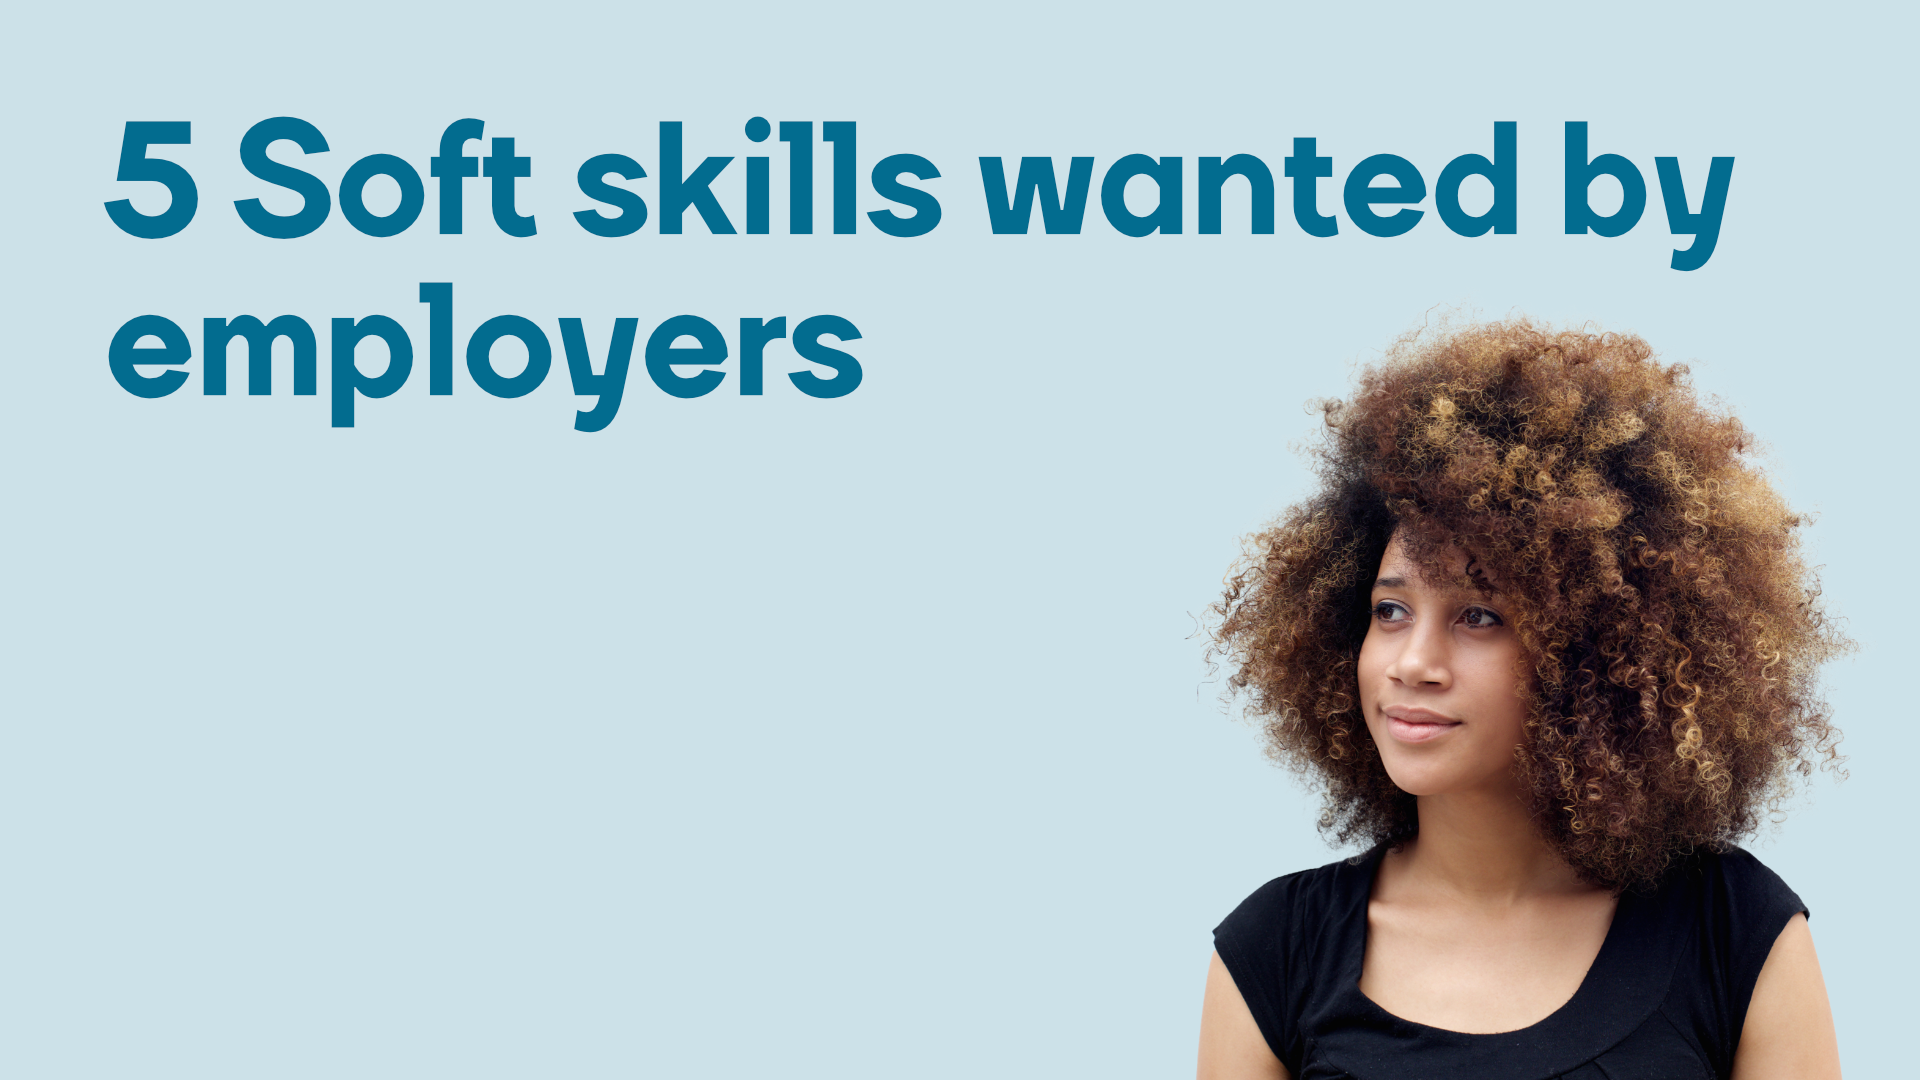 5 Soft skills wanted by employers